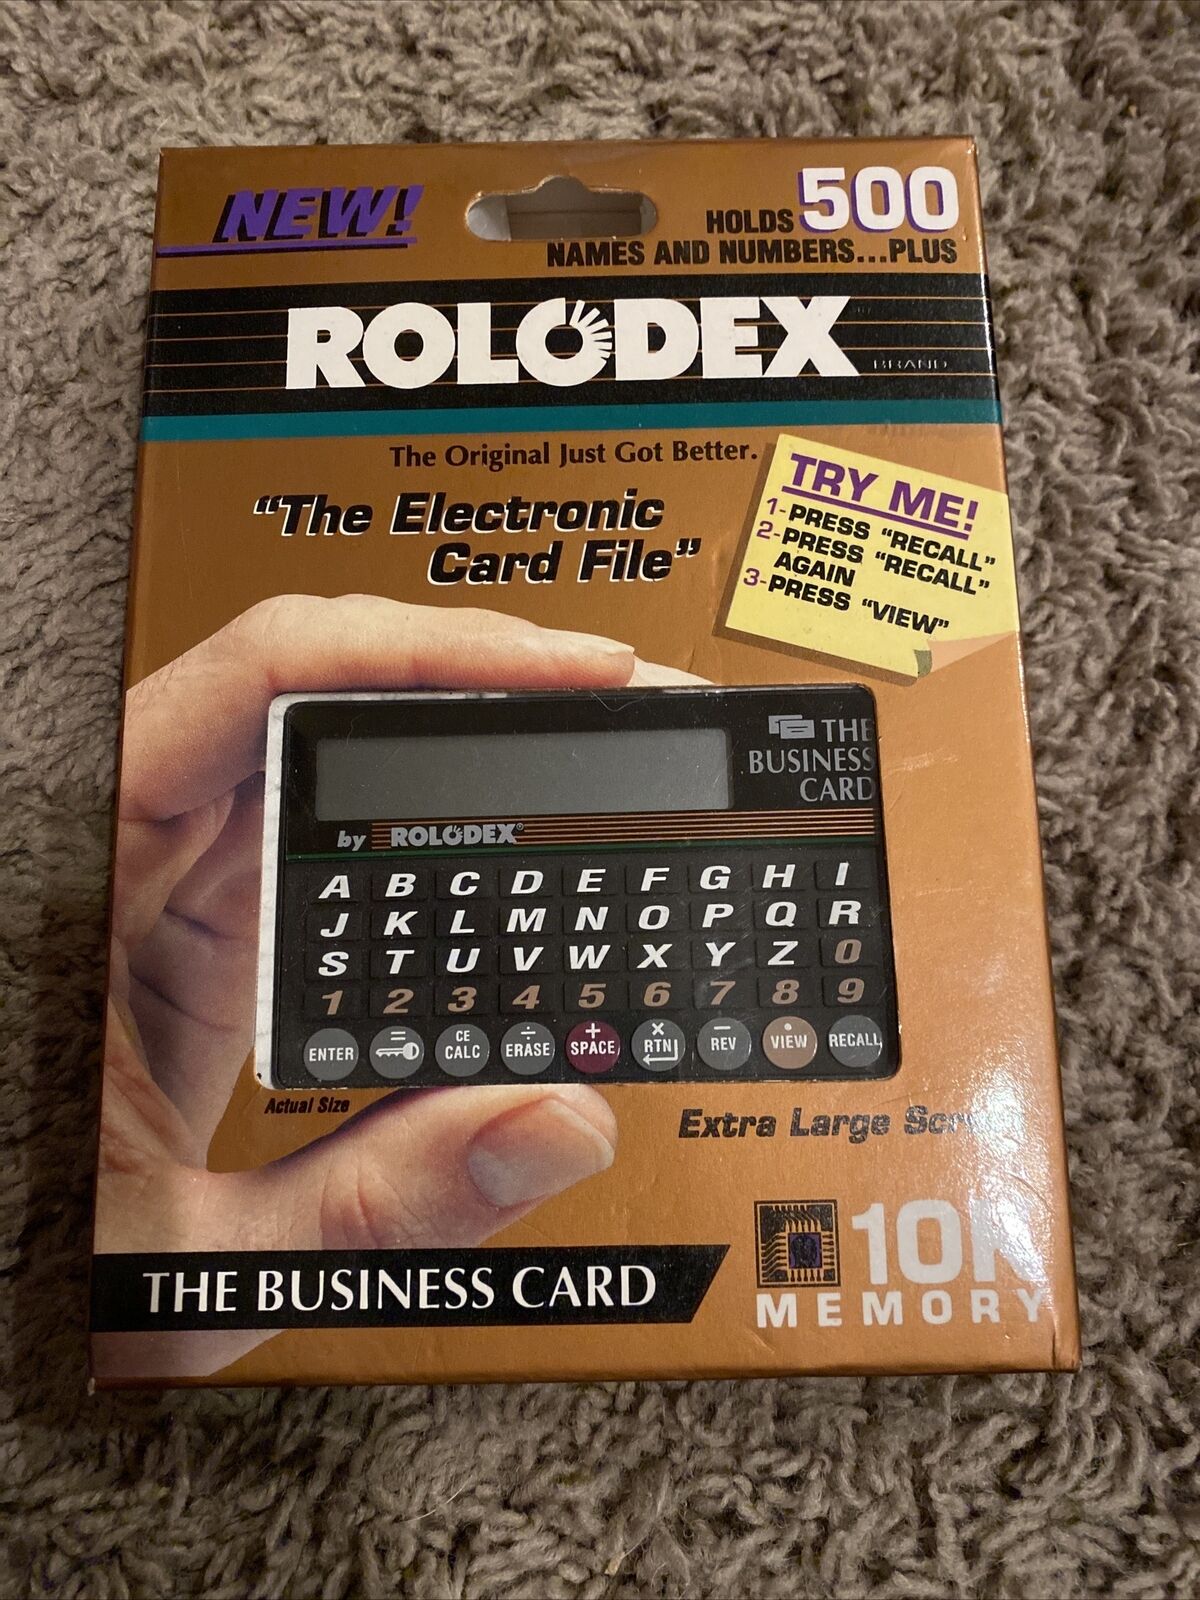 Rolodex 10k Memory The Business Card 1990 PP